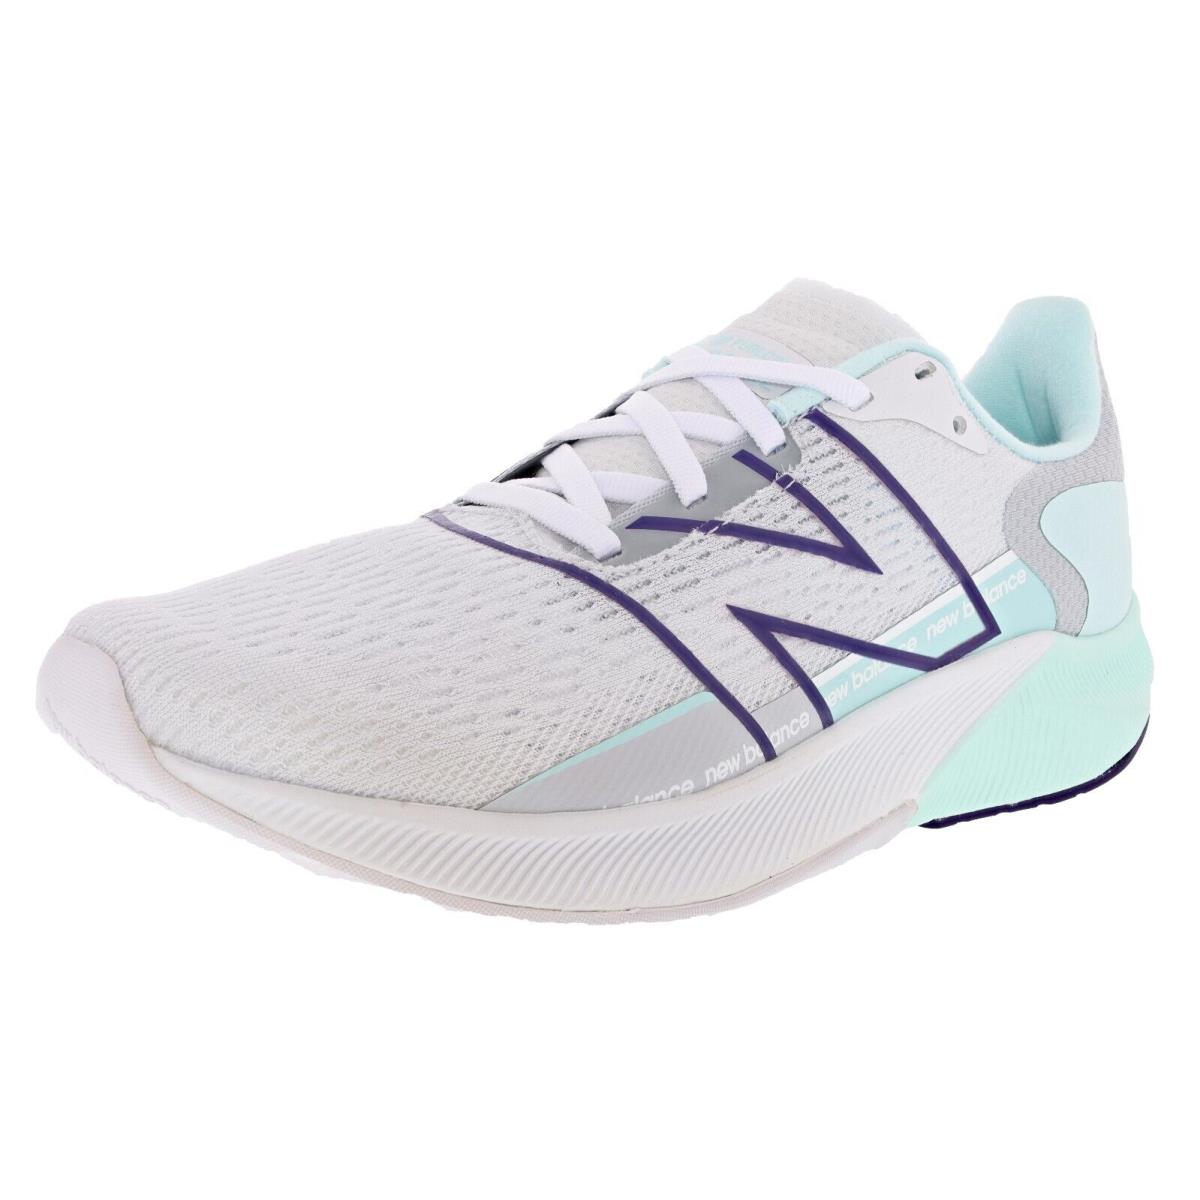 New Balance Women`s Wfcpr Fuelcell Propel V2 Cushioned Running Shoes ARTIC / FOX / MINT / CYCLONE